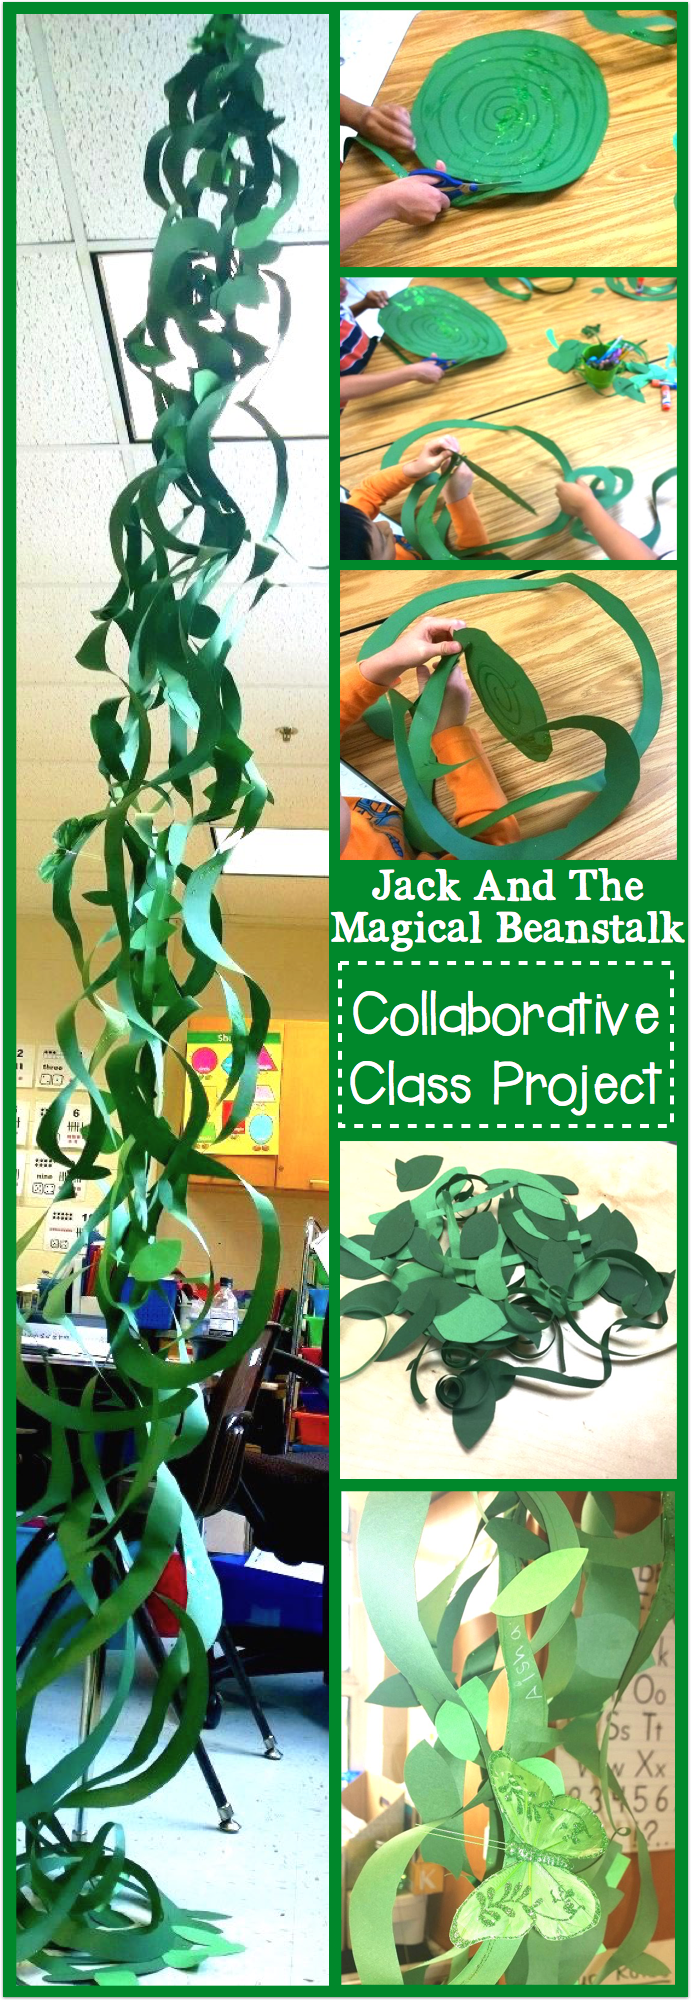 jack and the beanstalk craft